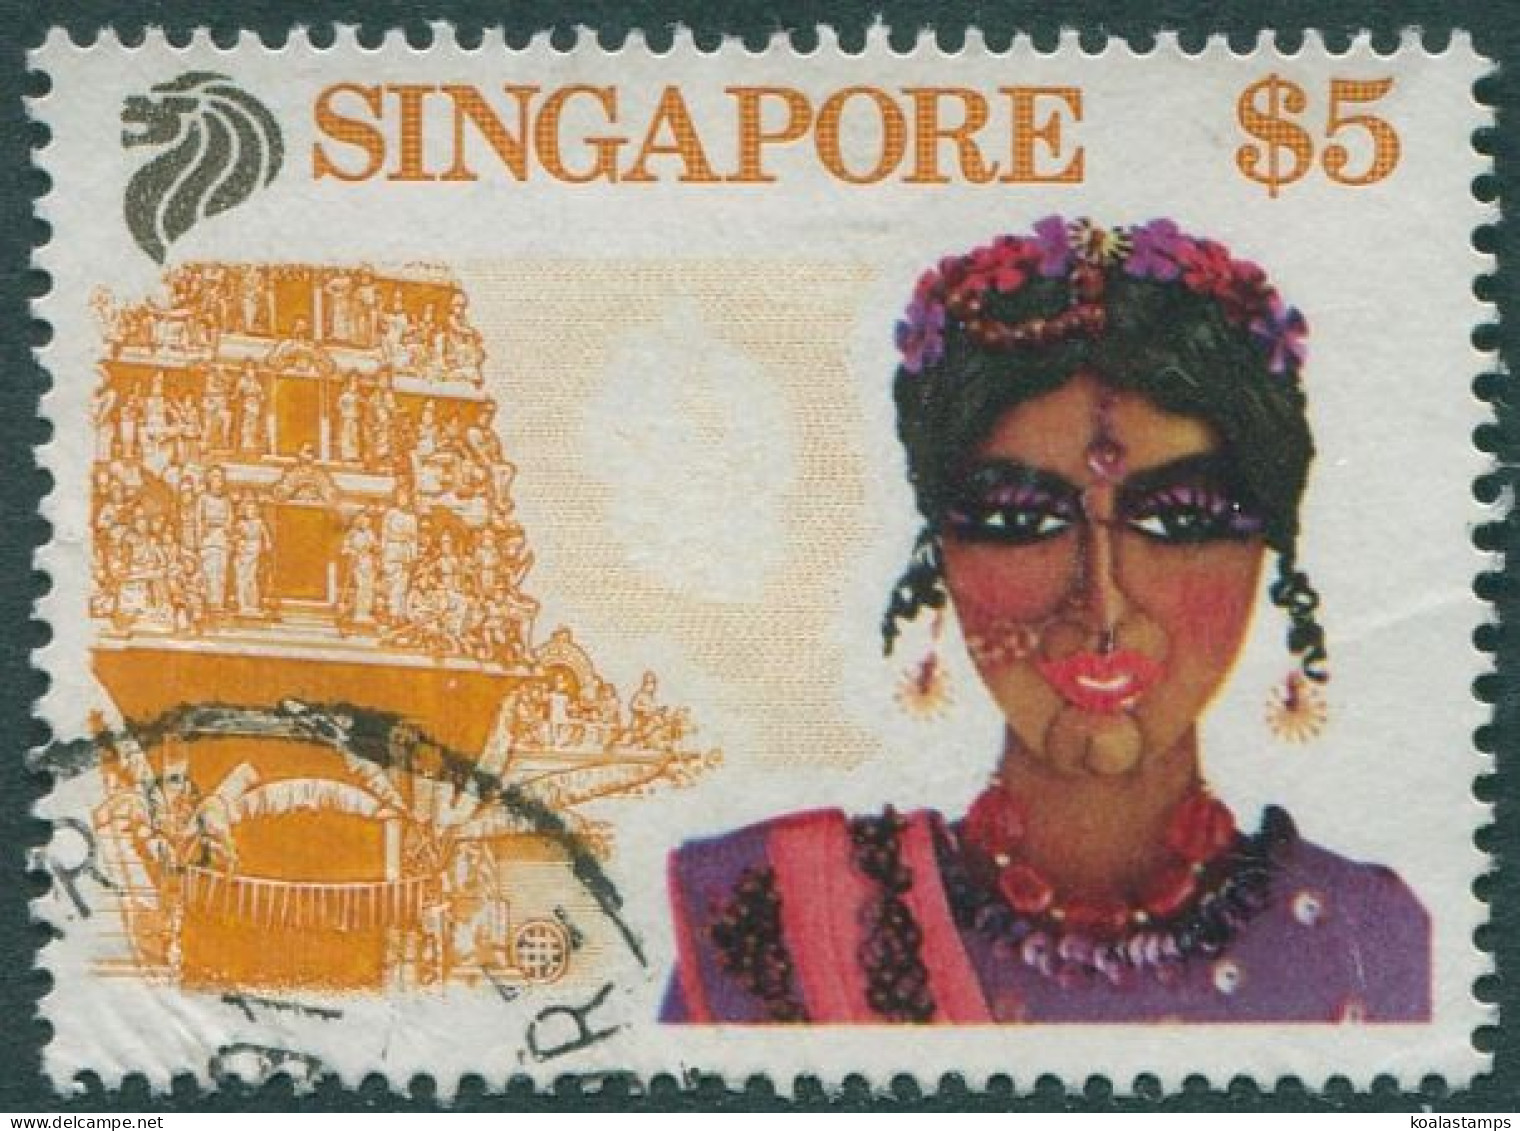 Singapore 1990 SG635 $5 Indian Dancer And Temple FU - Singapour (1959-...)